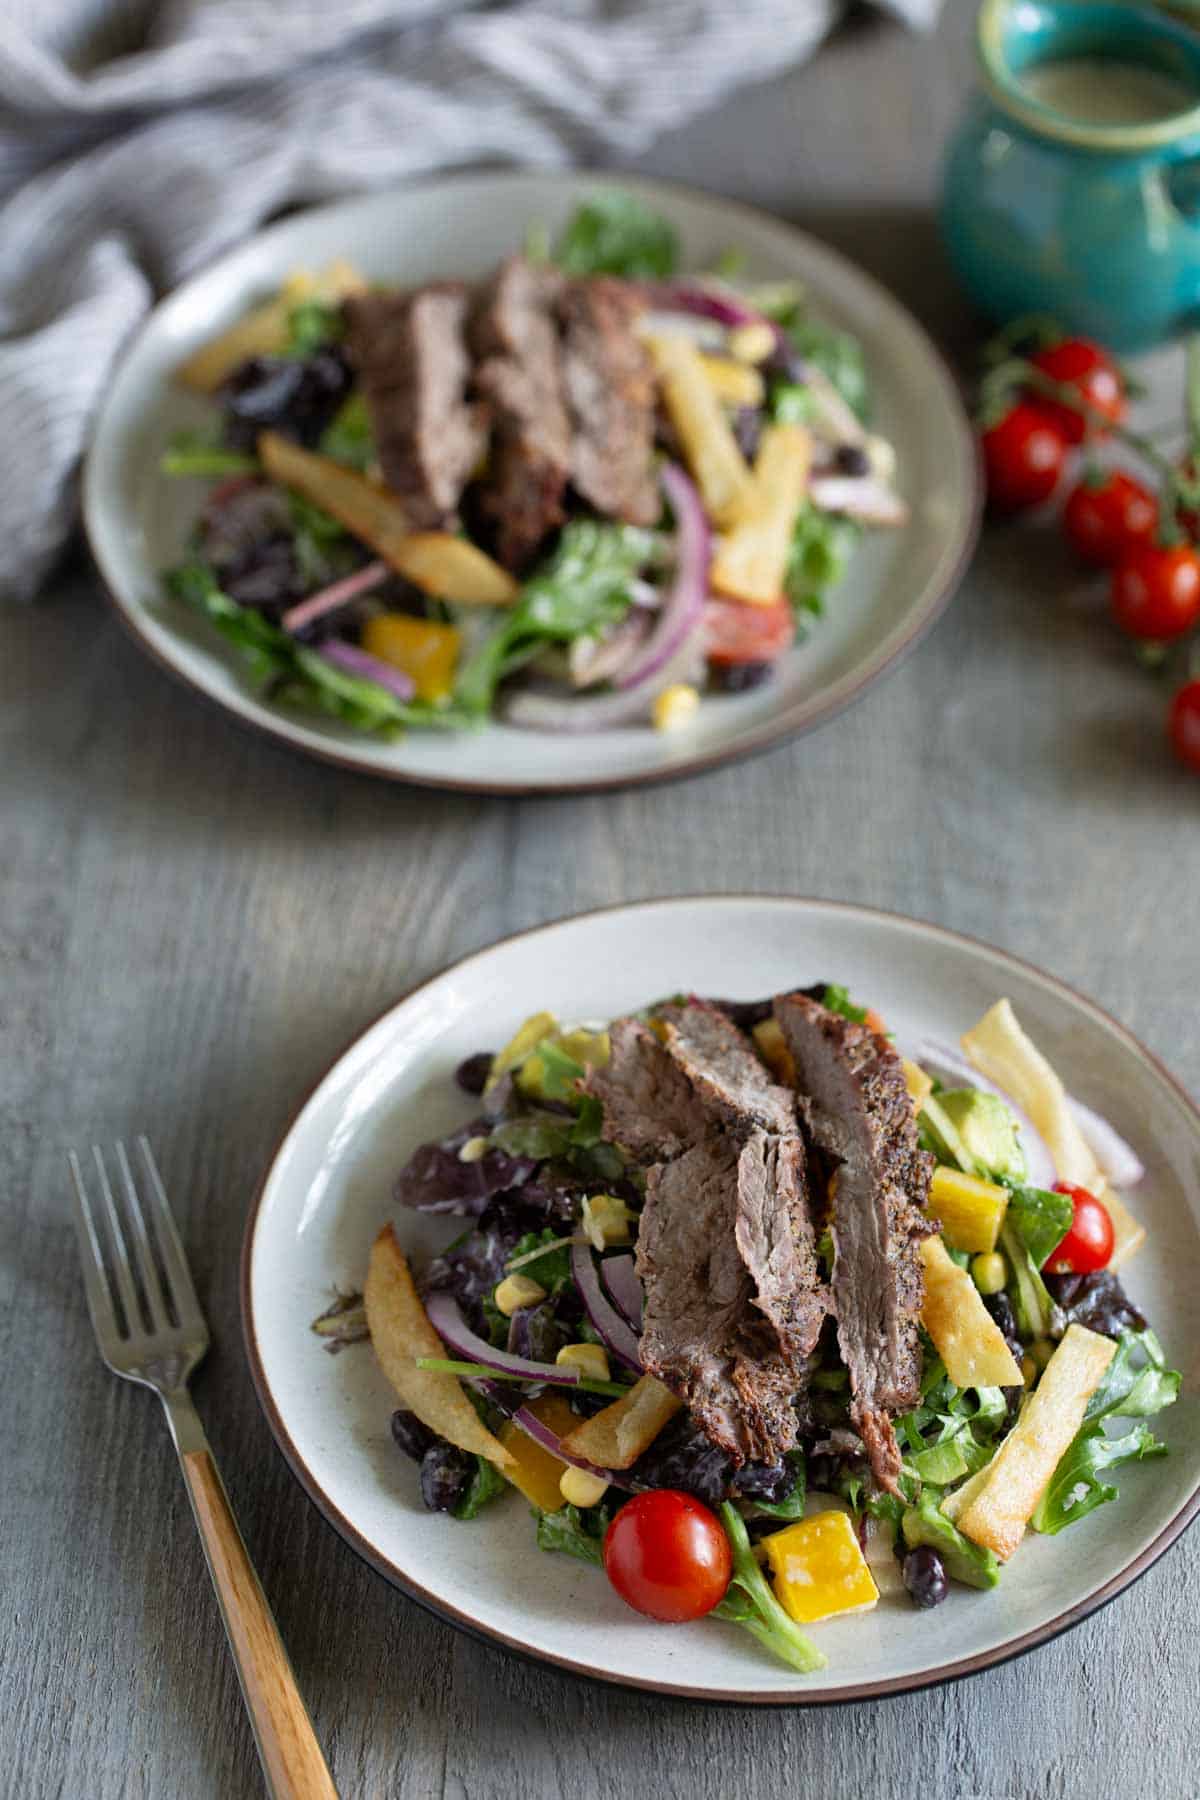 Two plates of steak salad with mixed greens, cherry tomatoes, onion slices, beans, and yellow bell pepper. A pitcher and cherry tomatoes are in the background. Fork placed beside the front plate.